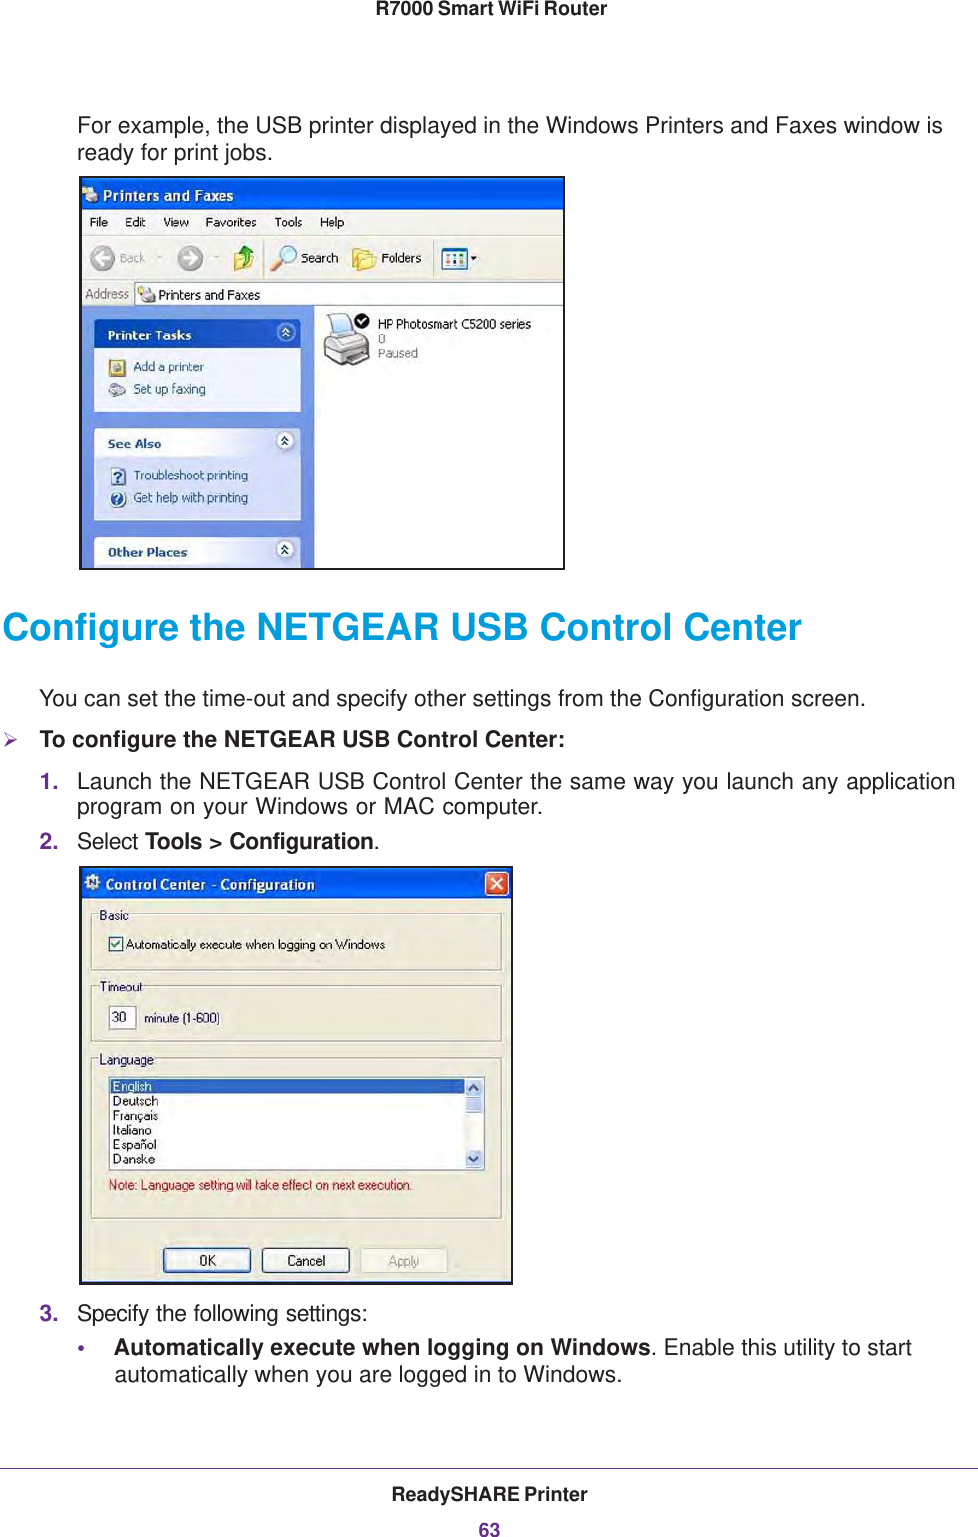 ReadySHARE Printer63 R7000 Smart WiFi RouterFor example, the USB printer displayed in the Windows Printers and Faxes window is ready for print jobs.Configure the NETGEAR USB Control CenterYou can set the time-out and specify other settings from the Configuration screen.To configure the NETGEAR USB Control Center:1. Launch the NETGEAR USB Control Center the same way you launch any application program on your Windows or MAC computer.2. Select Tools &gt; Configuration.3. Specify the following settings:•Automatically execute when logging on Windows. Enable this utility to start automatically when you are logged in to Windows.